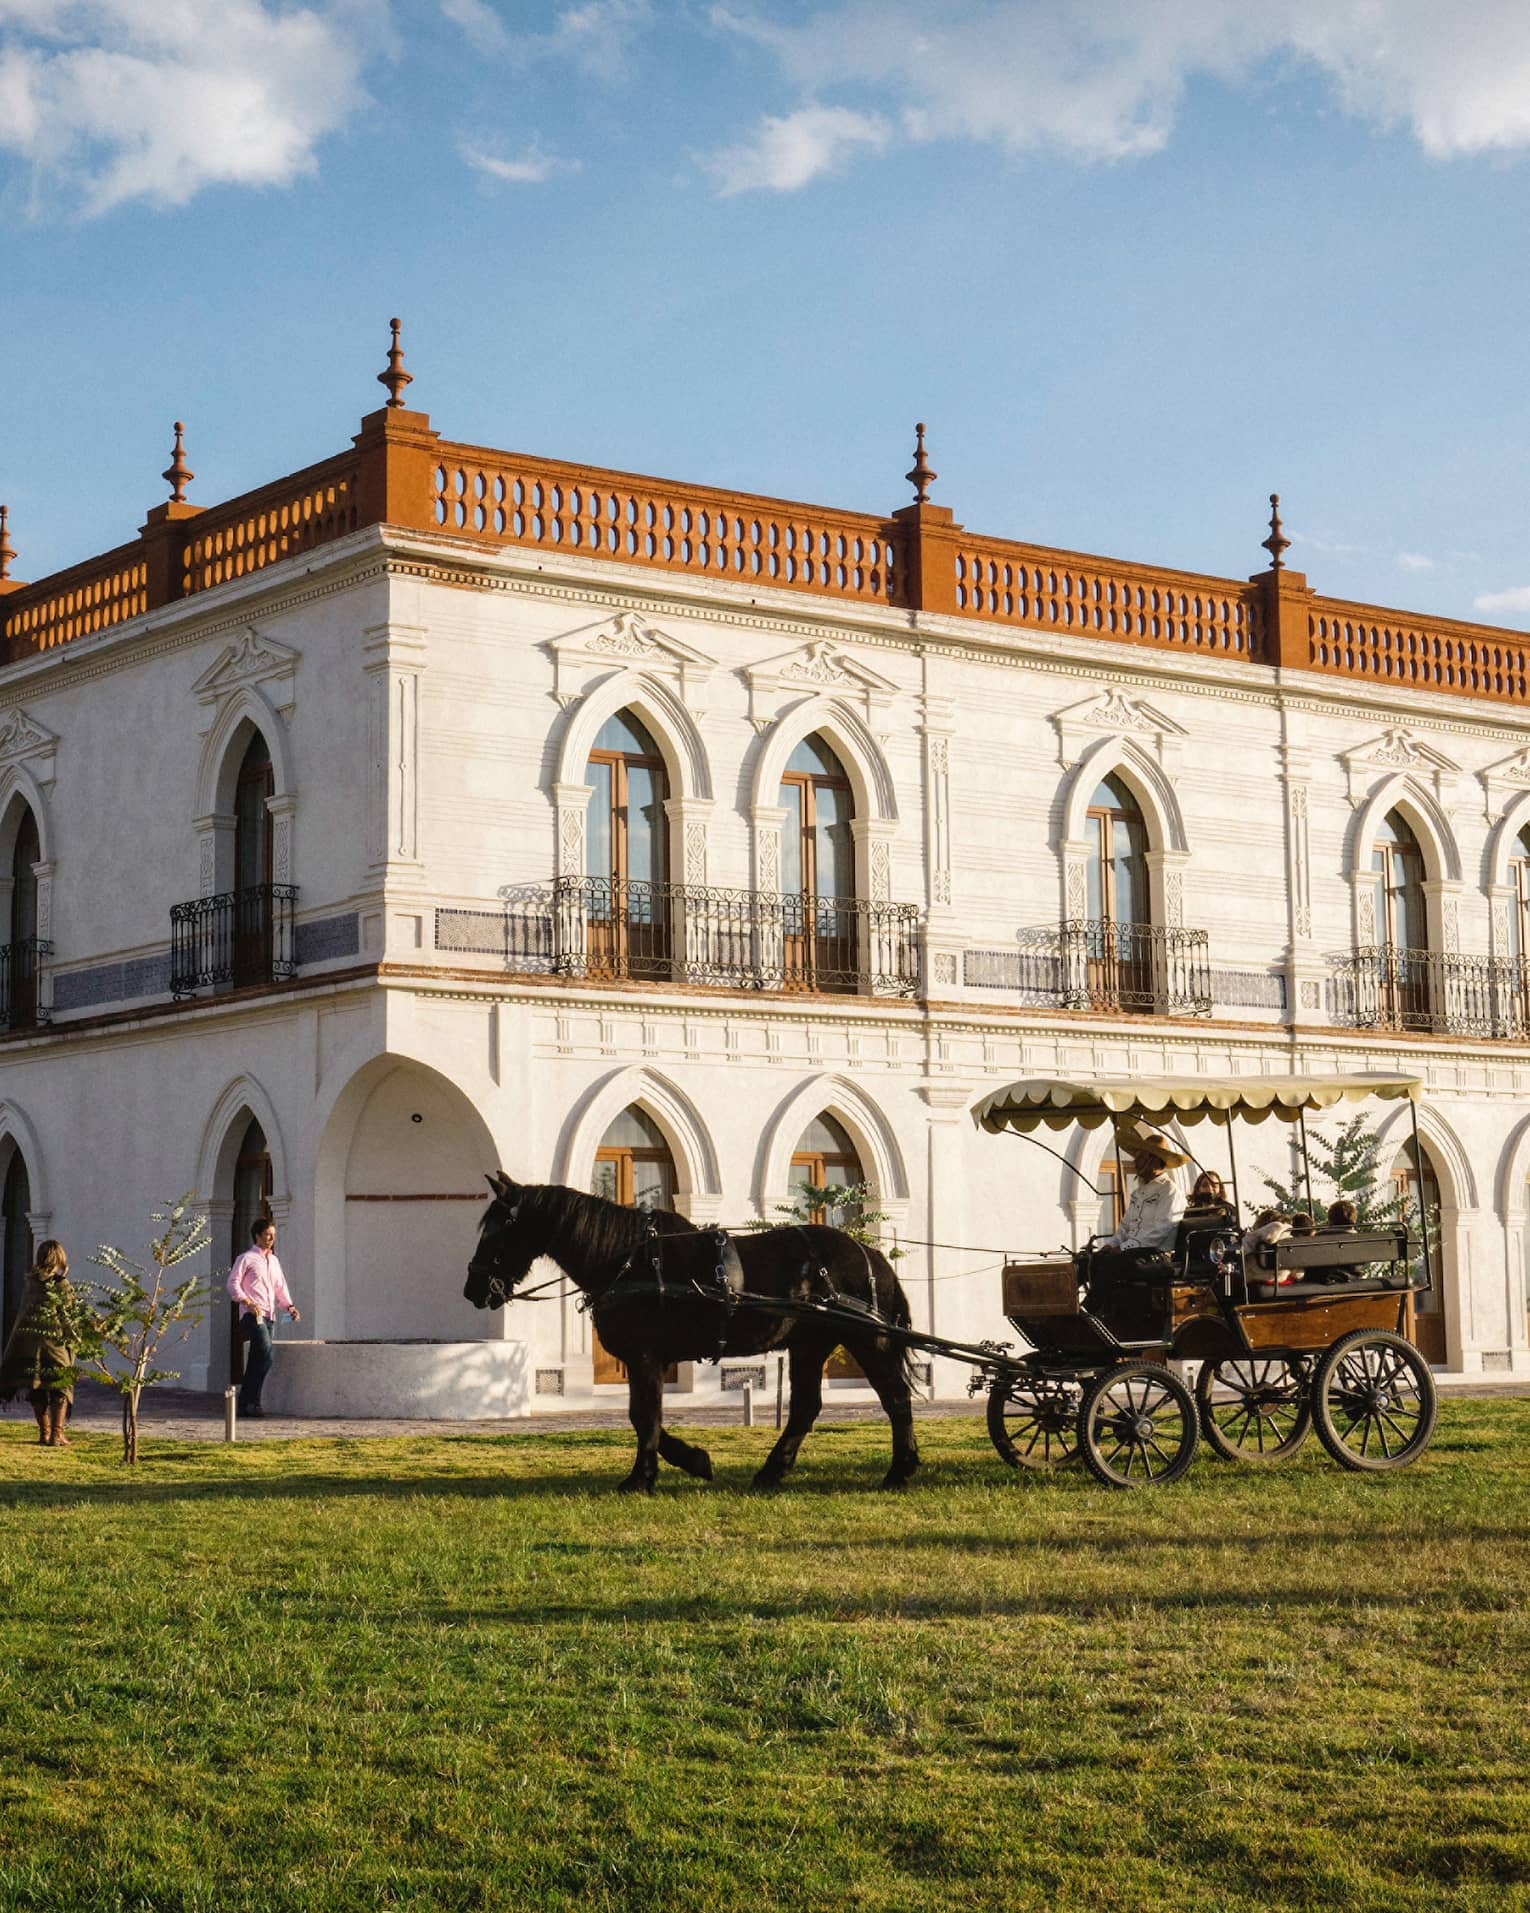 A horse pulling a carriages over grass outside of a large building.